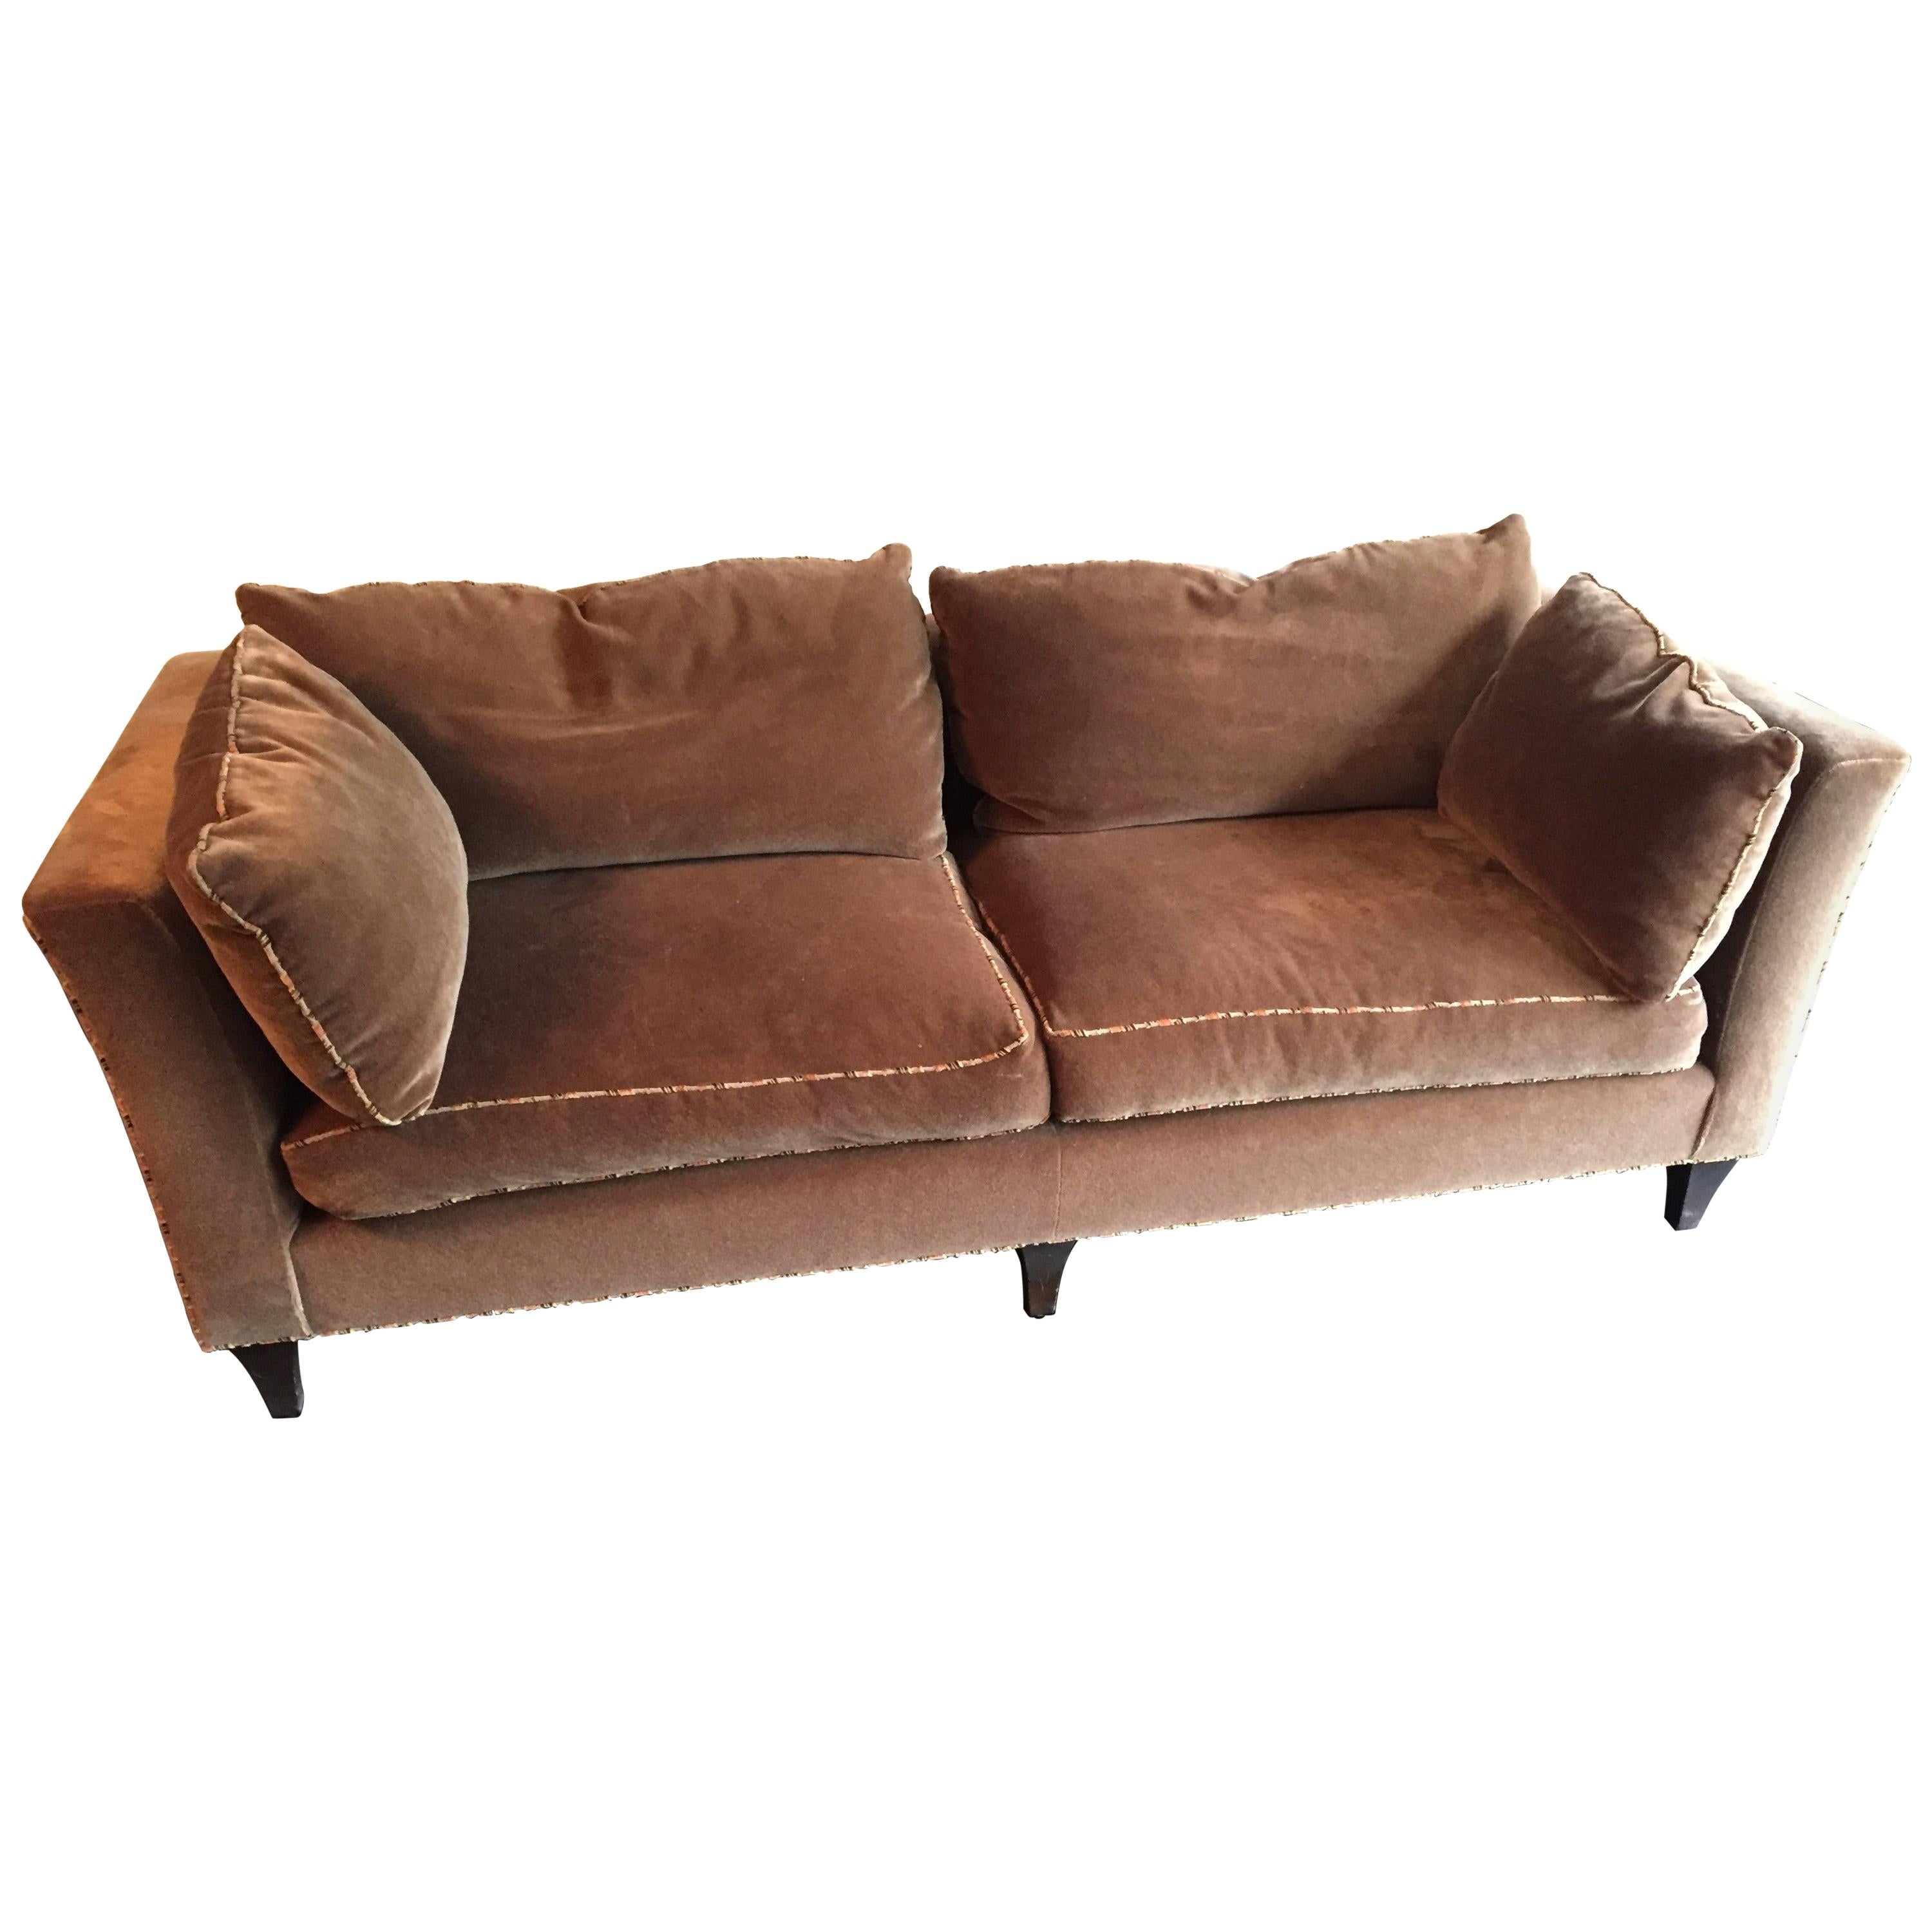 Baker Mohair Sofa Madison in Taupe  or Mushroom  For Sale